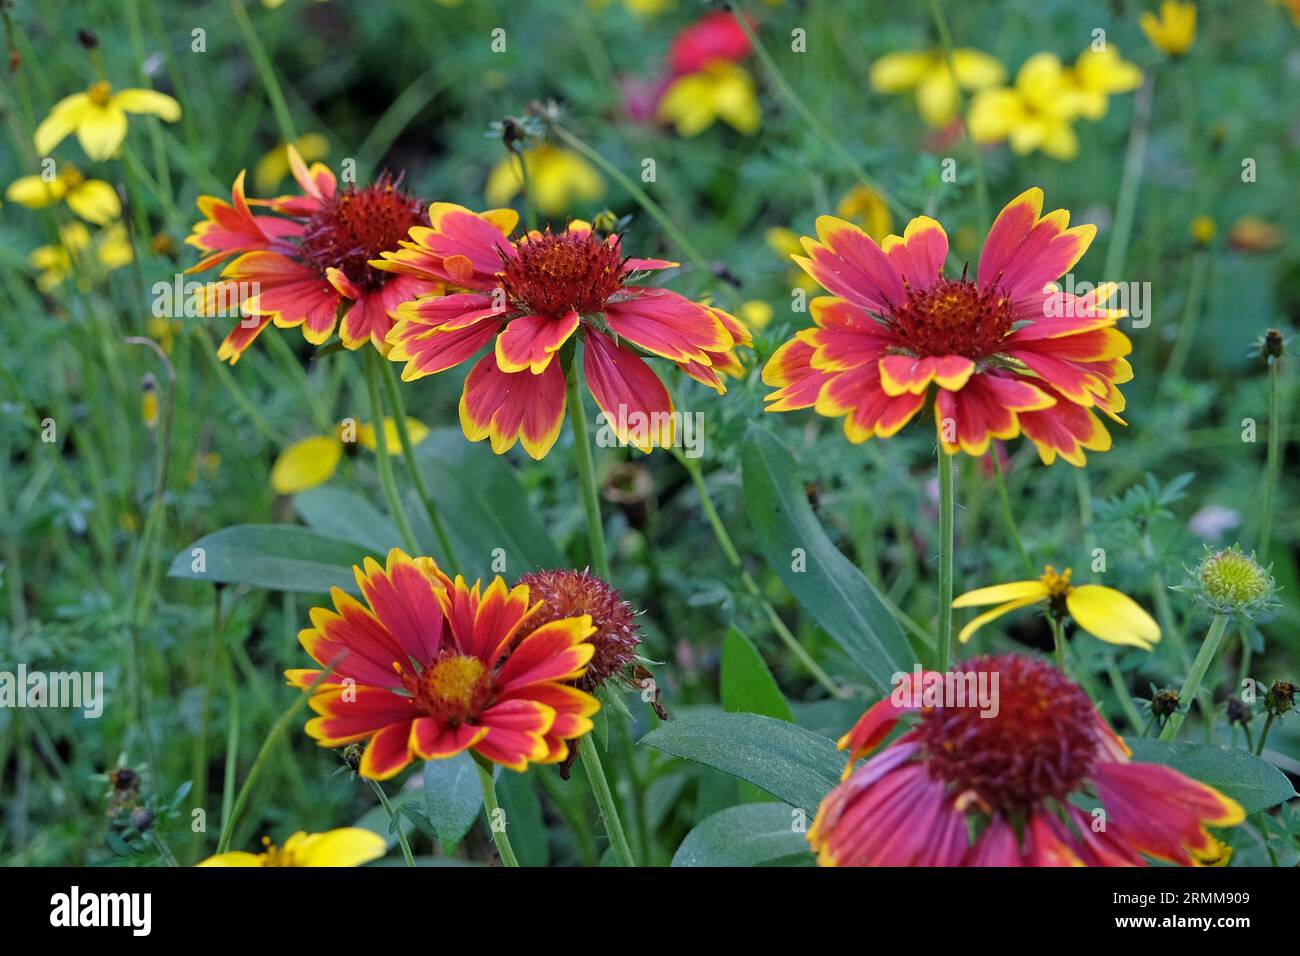 Red with a yellow fringe Gaillardia pulchella, also known as firewheel, Indian blanket, Indian blanket flower, in bloom. Stock Photo